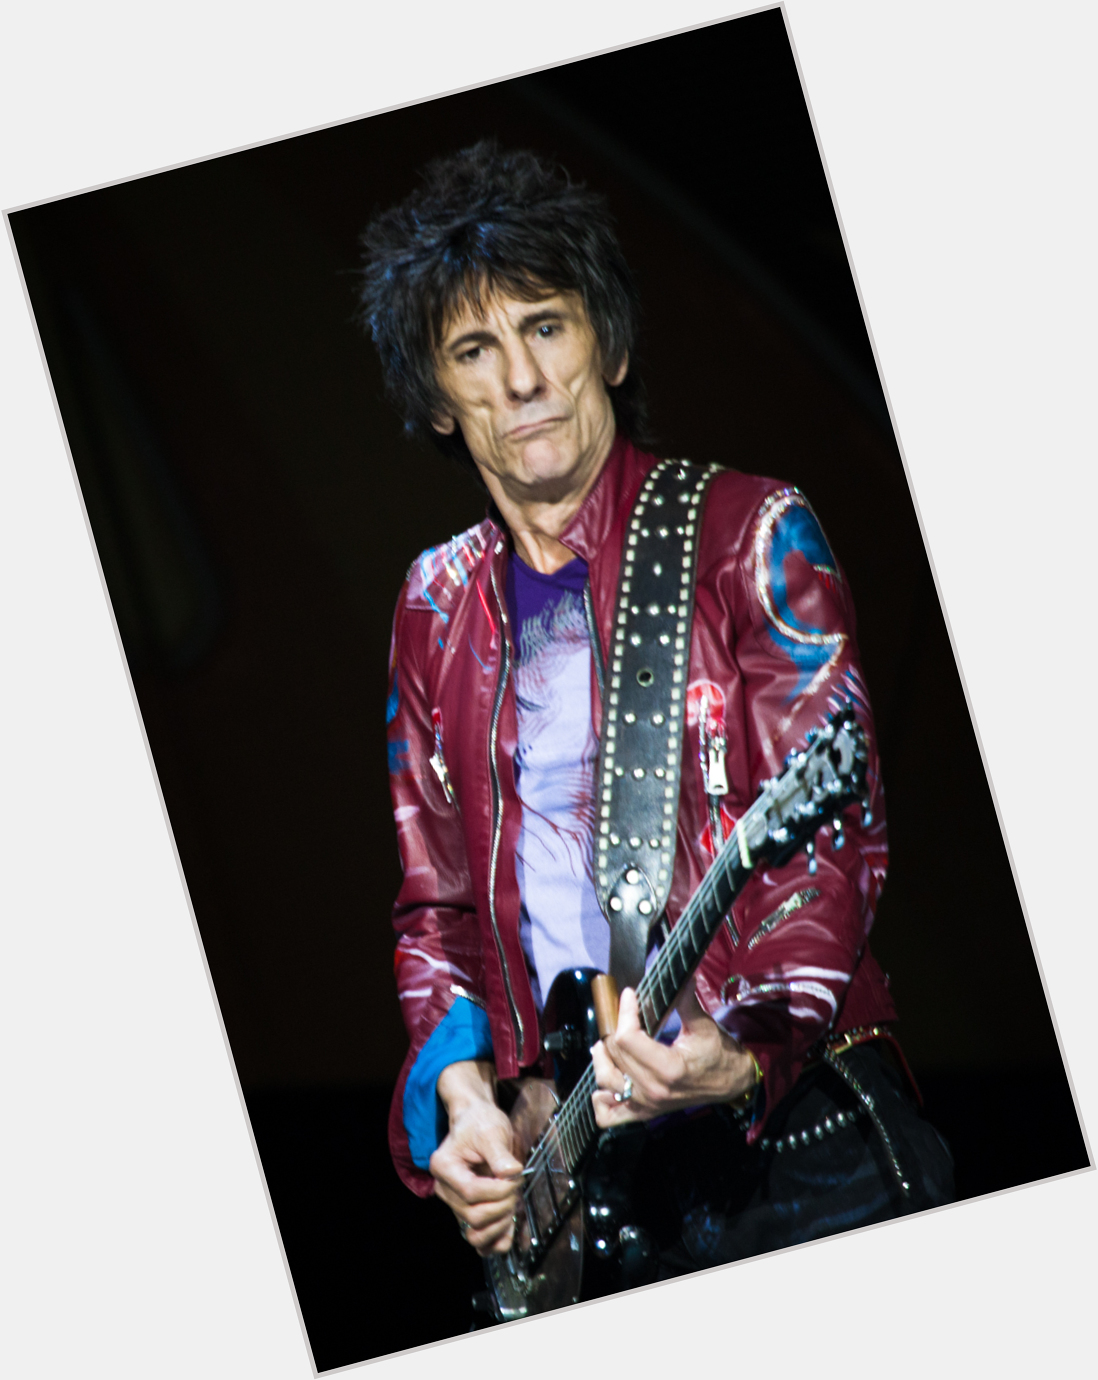 <a href="/hot-men/ronnie-wood/where-dating-news-photos">Ronnie Wood</a> Athletic body,  